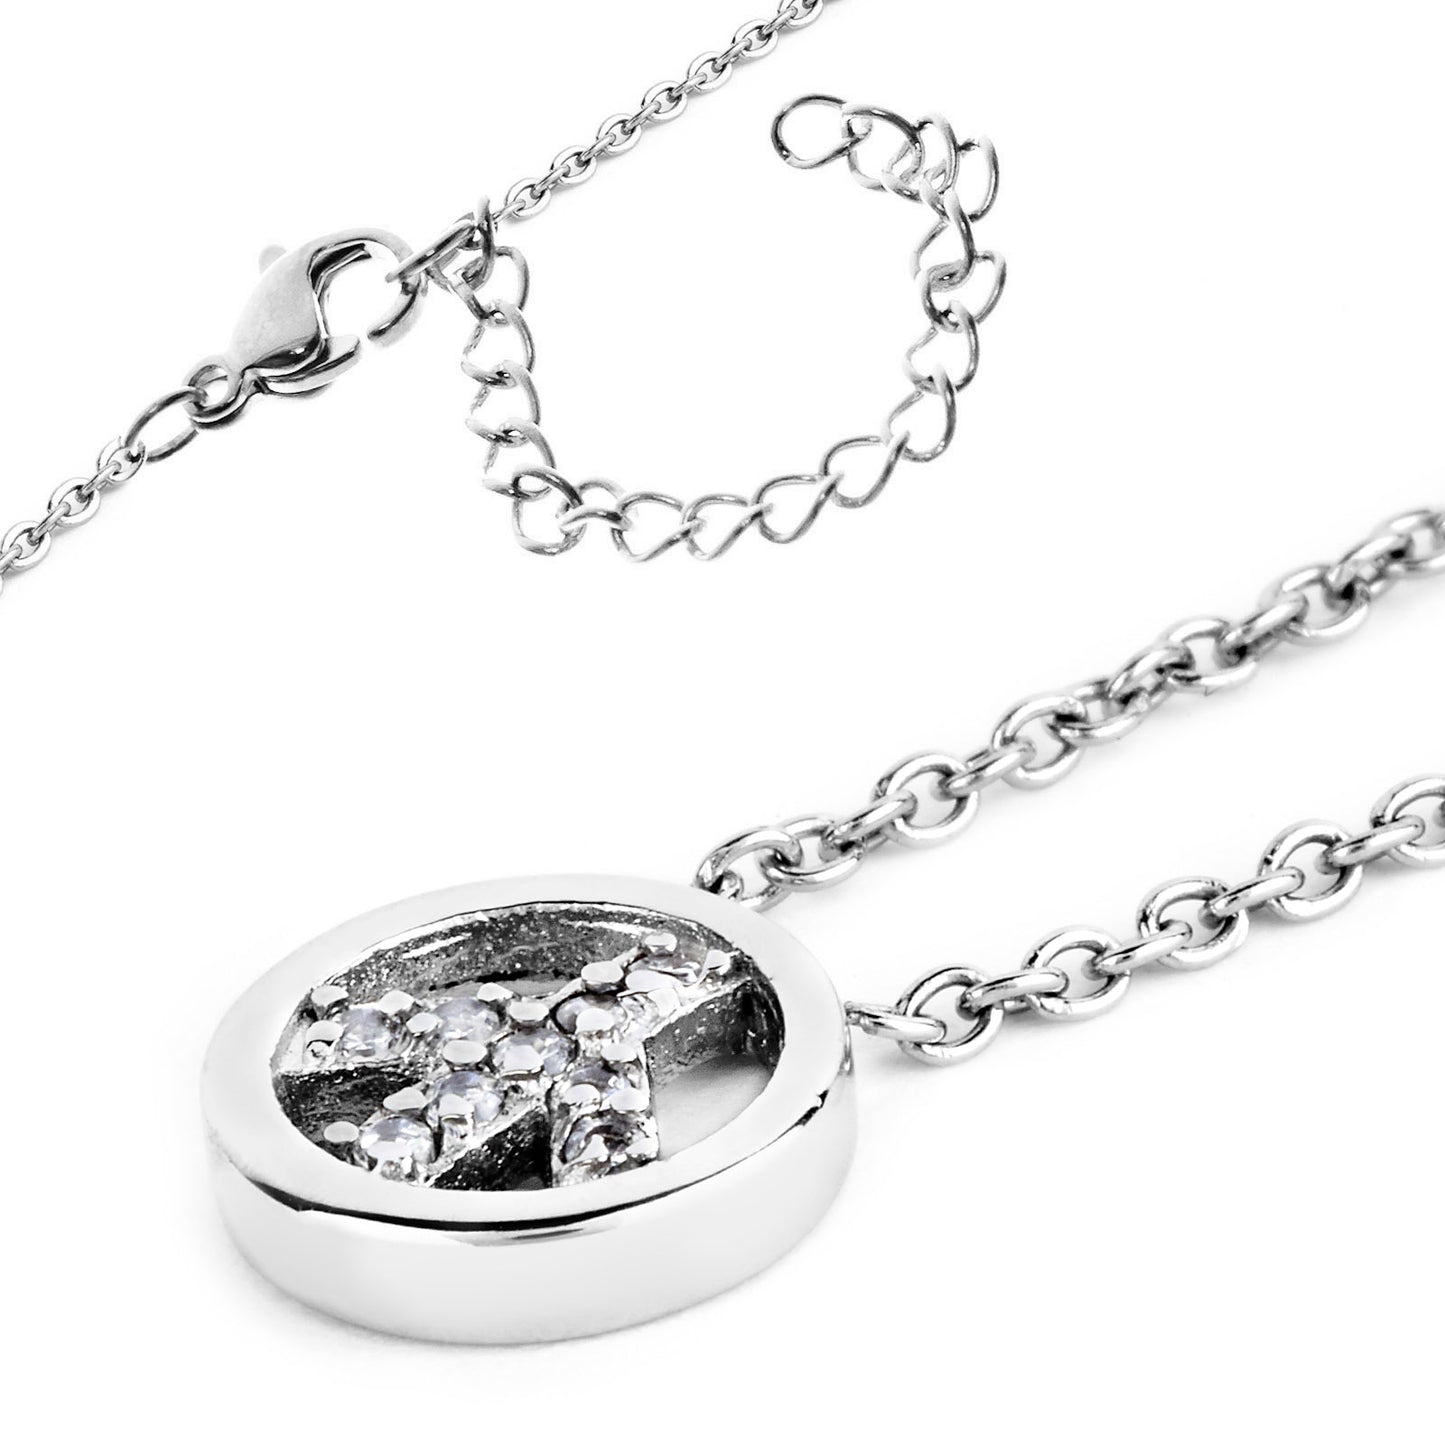 ELYA Cubic Zirconia Peace Stainless Steel Pendant Necklace - 18"